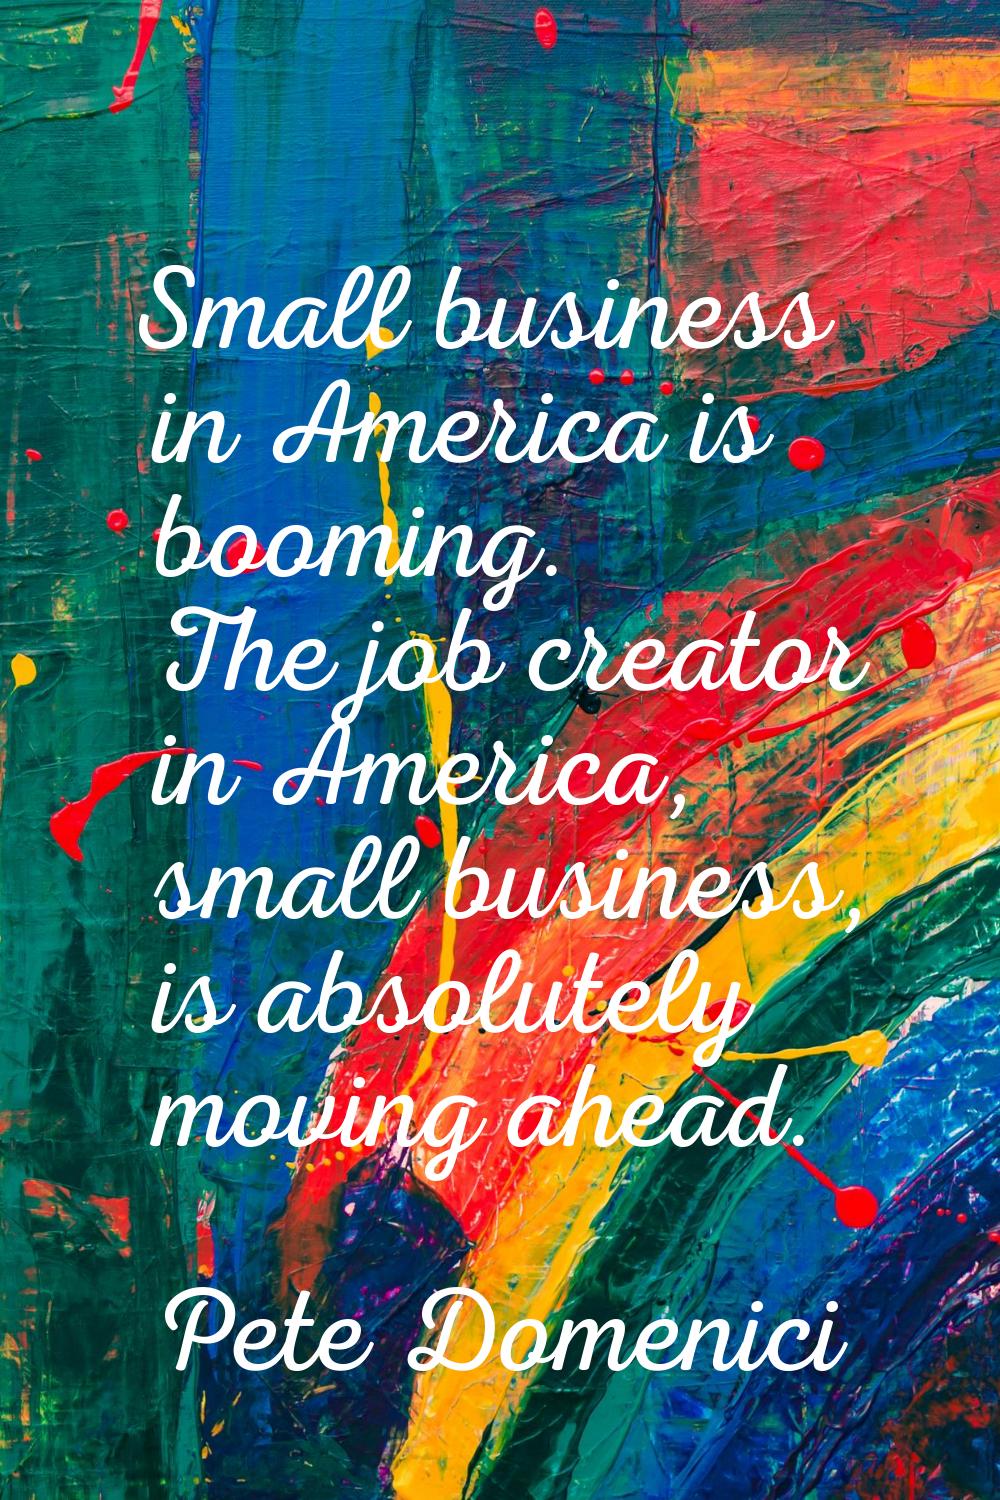 Small business in America is booming. The job creator in America, small business, is absolutely mov